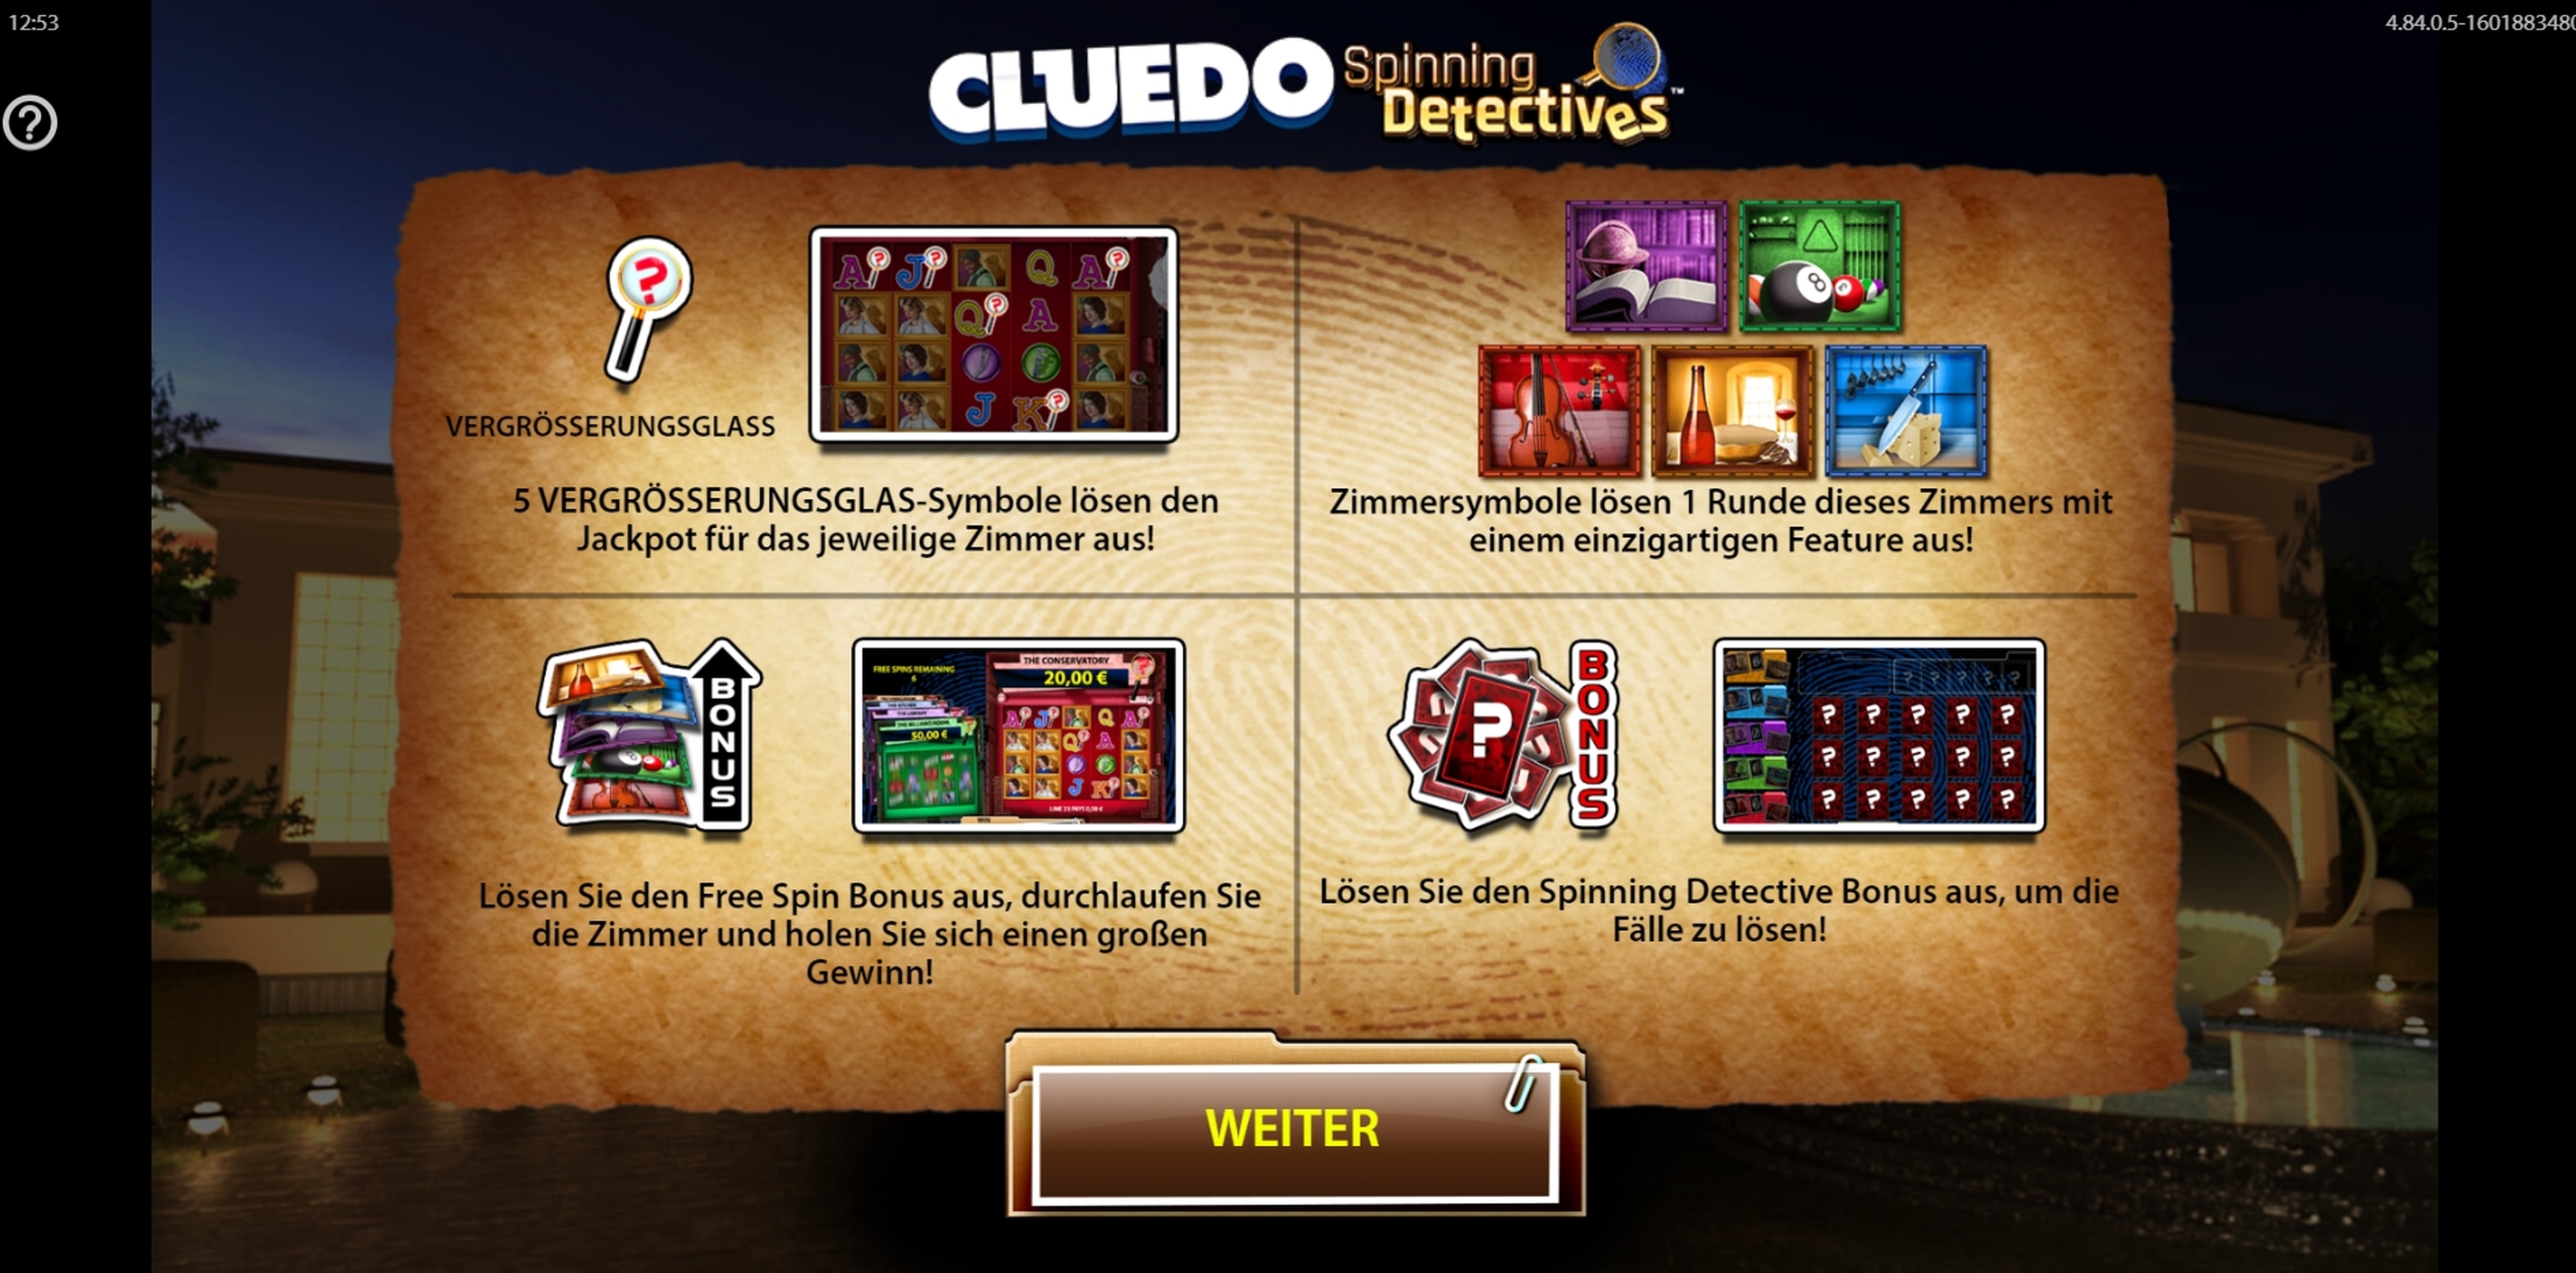 Play CLUEDO Spinning Detectives Free Casino Slot Game by WMS